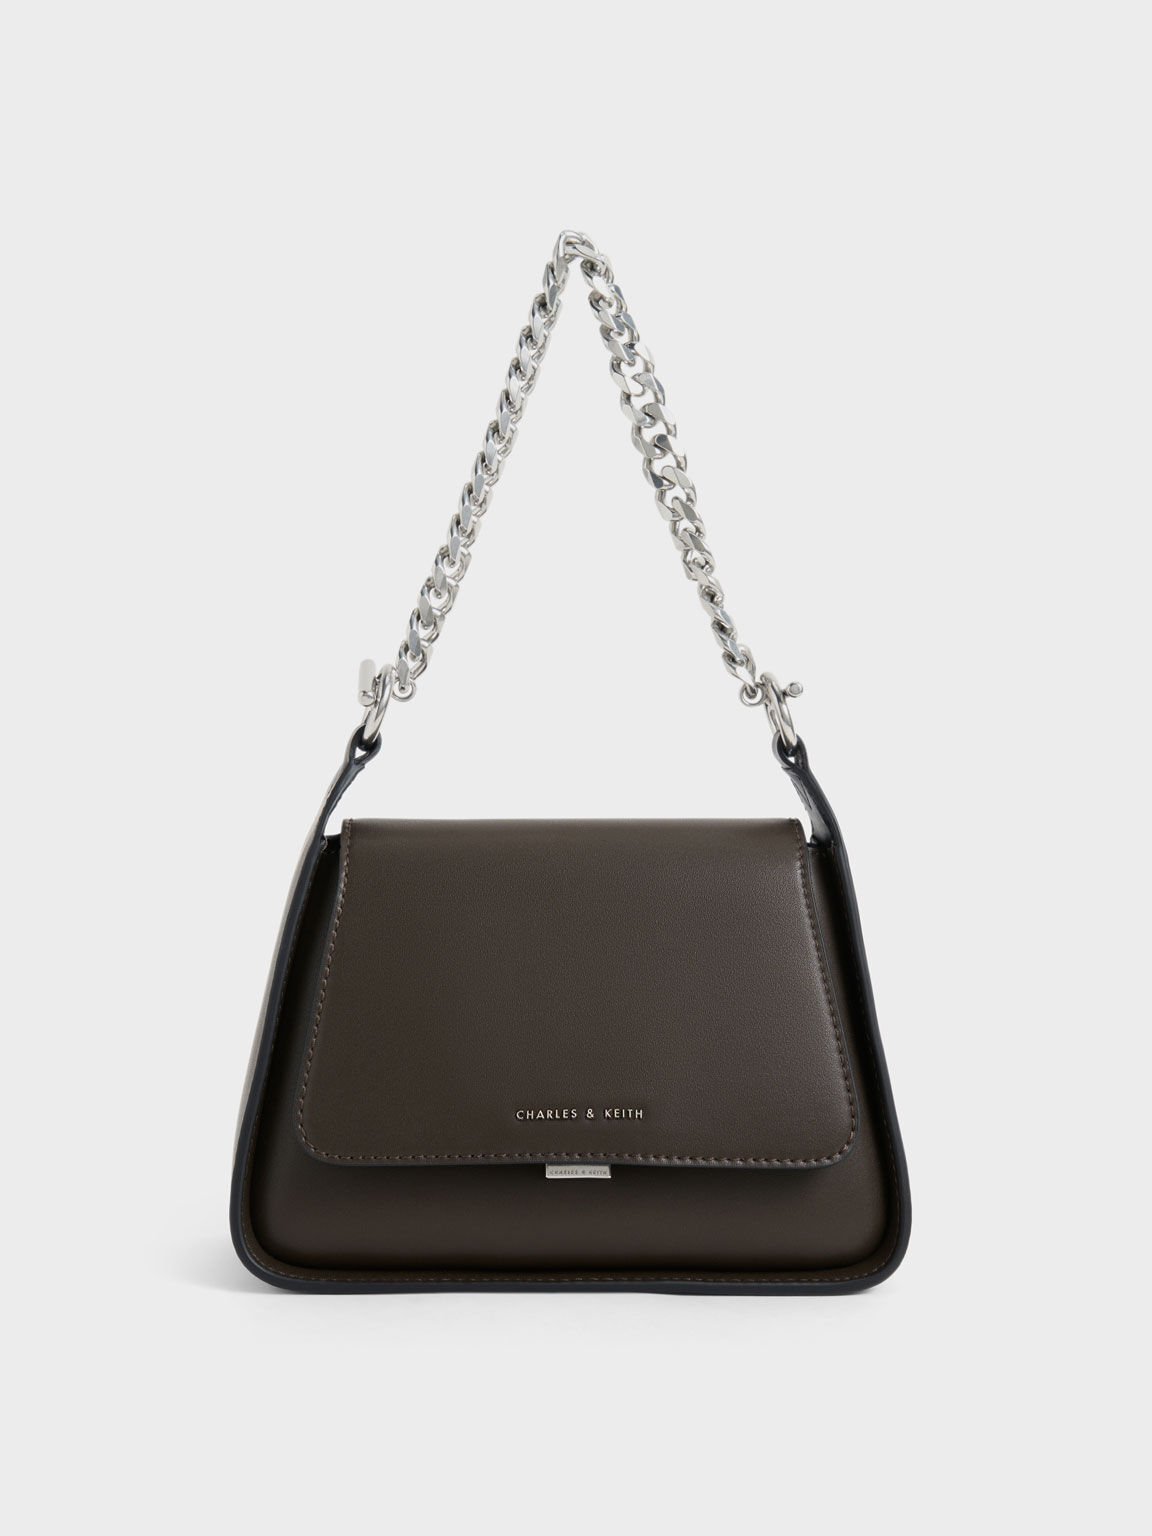 Moss Top Handle Trapeze Bag, CHARLES & KEITH